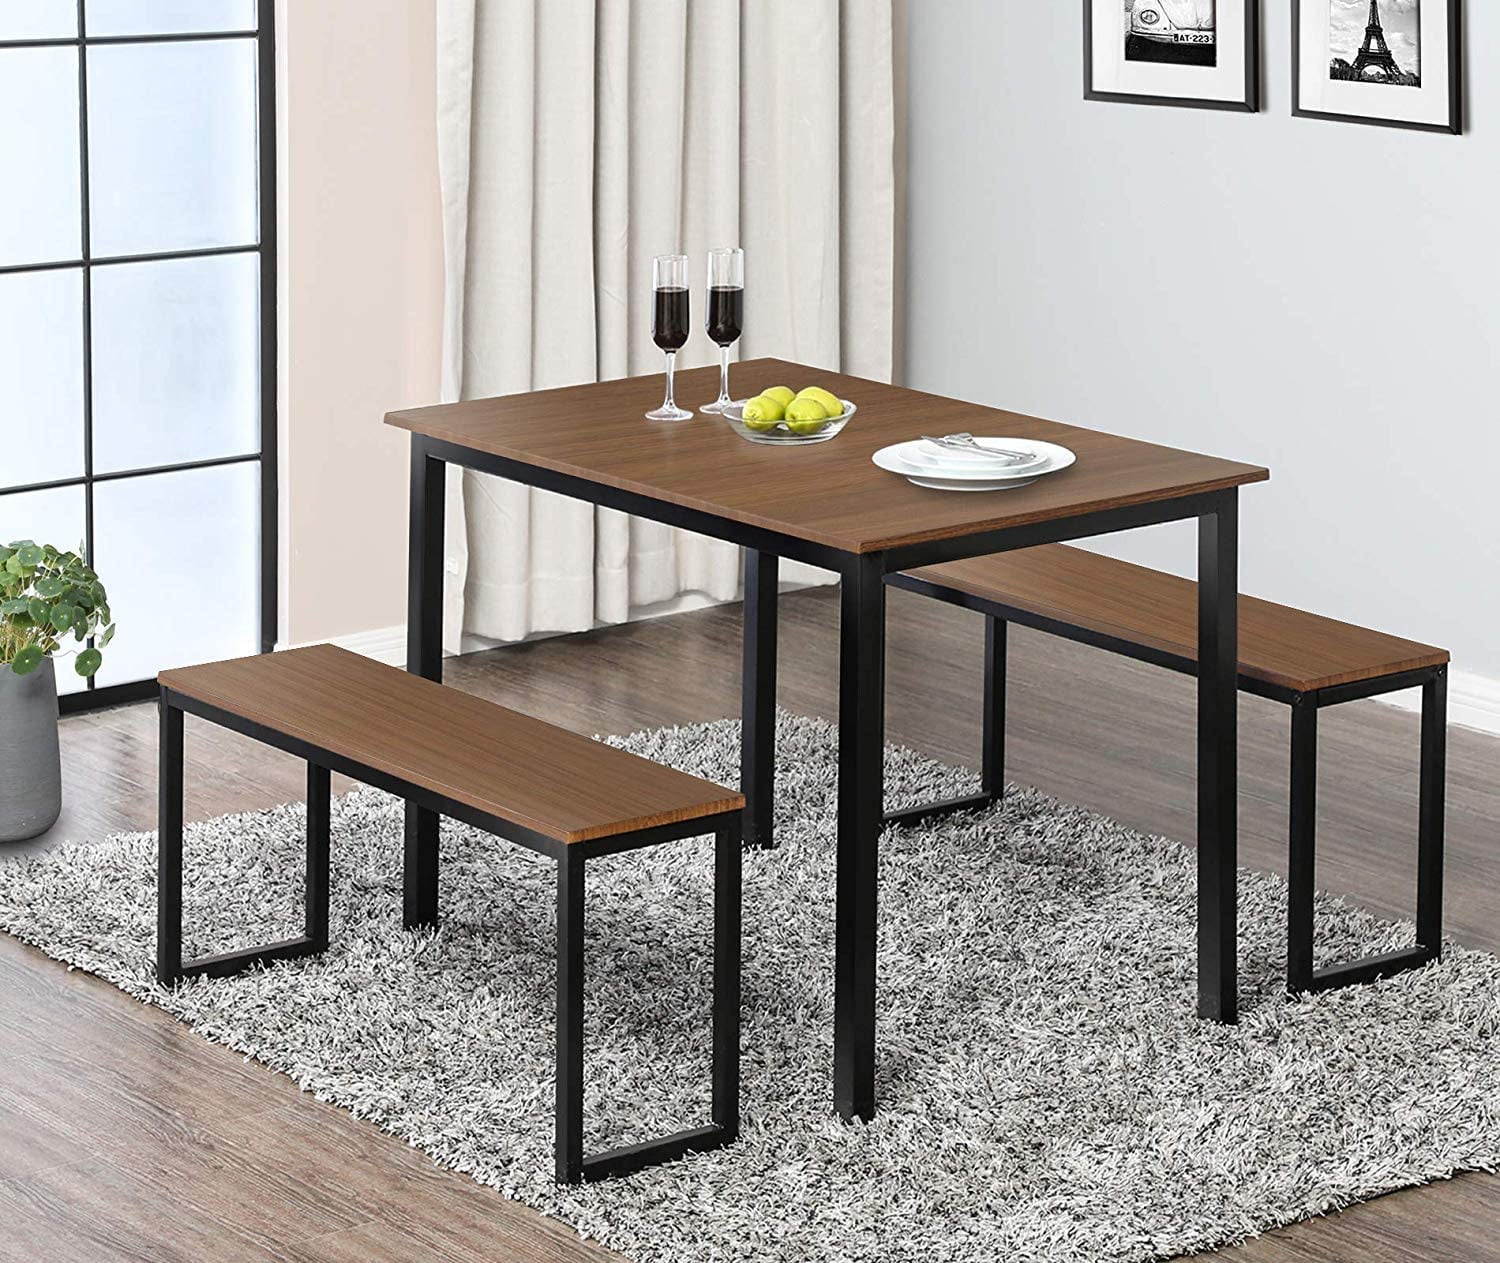 Wood 3 Piece Dining Table Sets 2 Bench Chair Rectangular Table Kitchen Furniture 